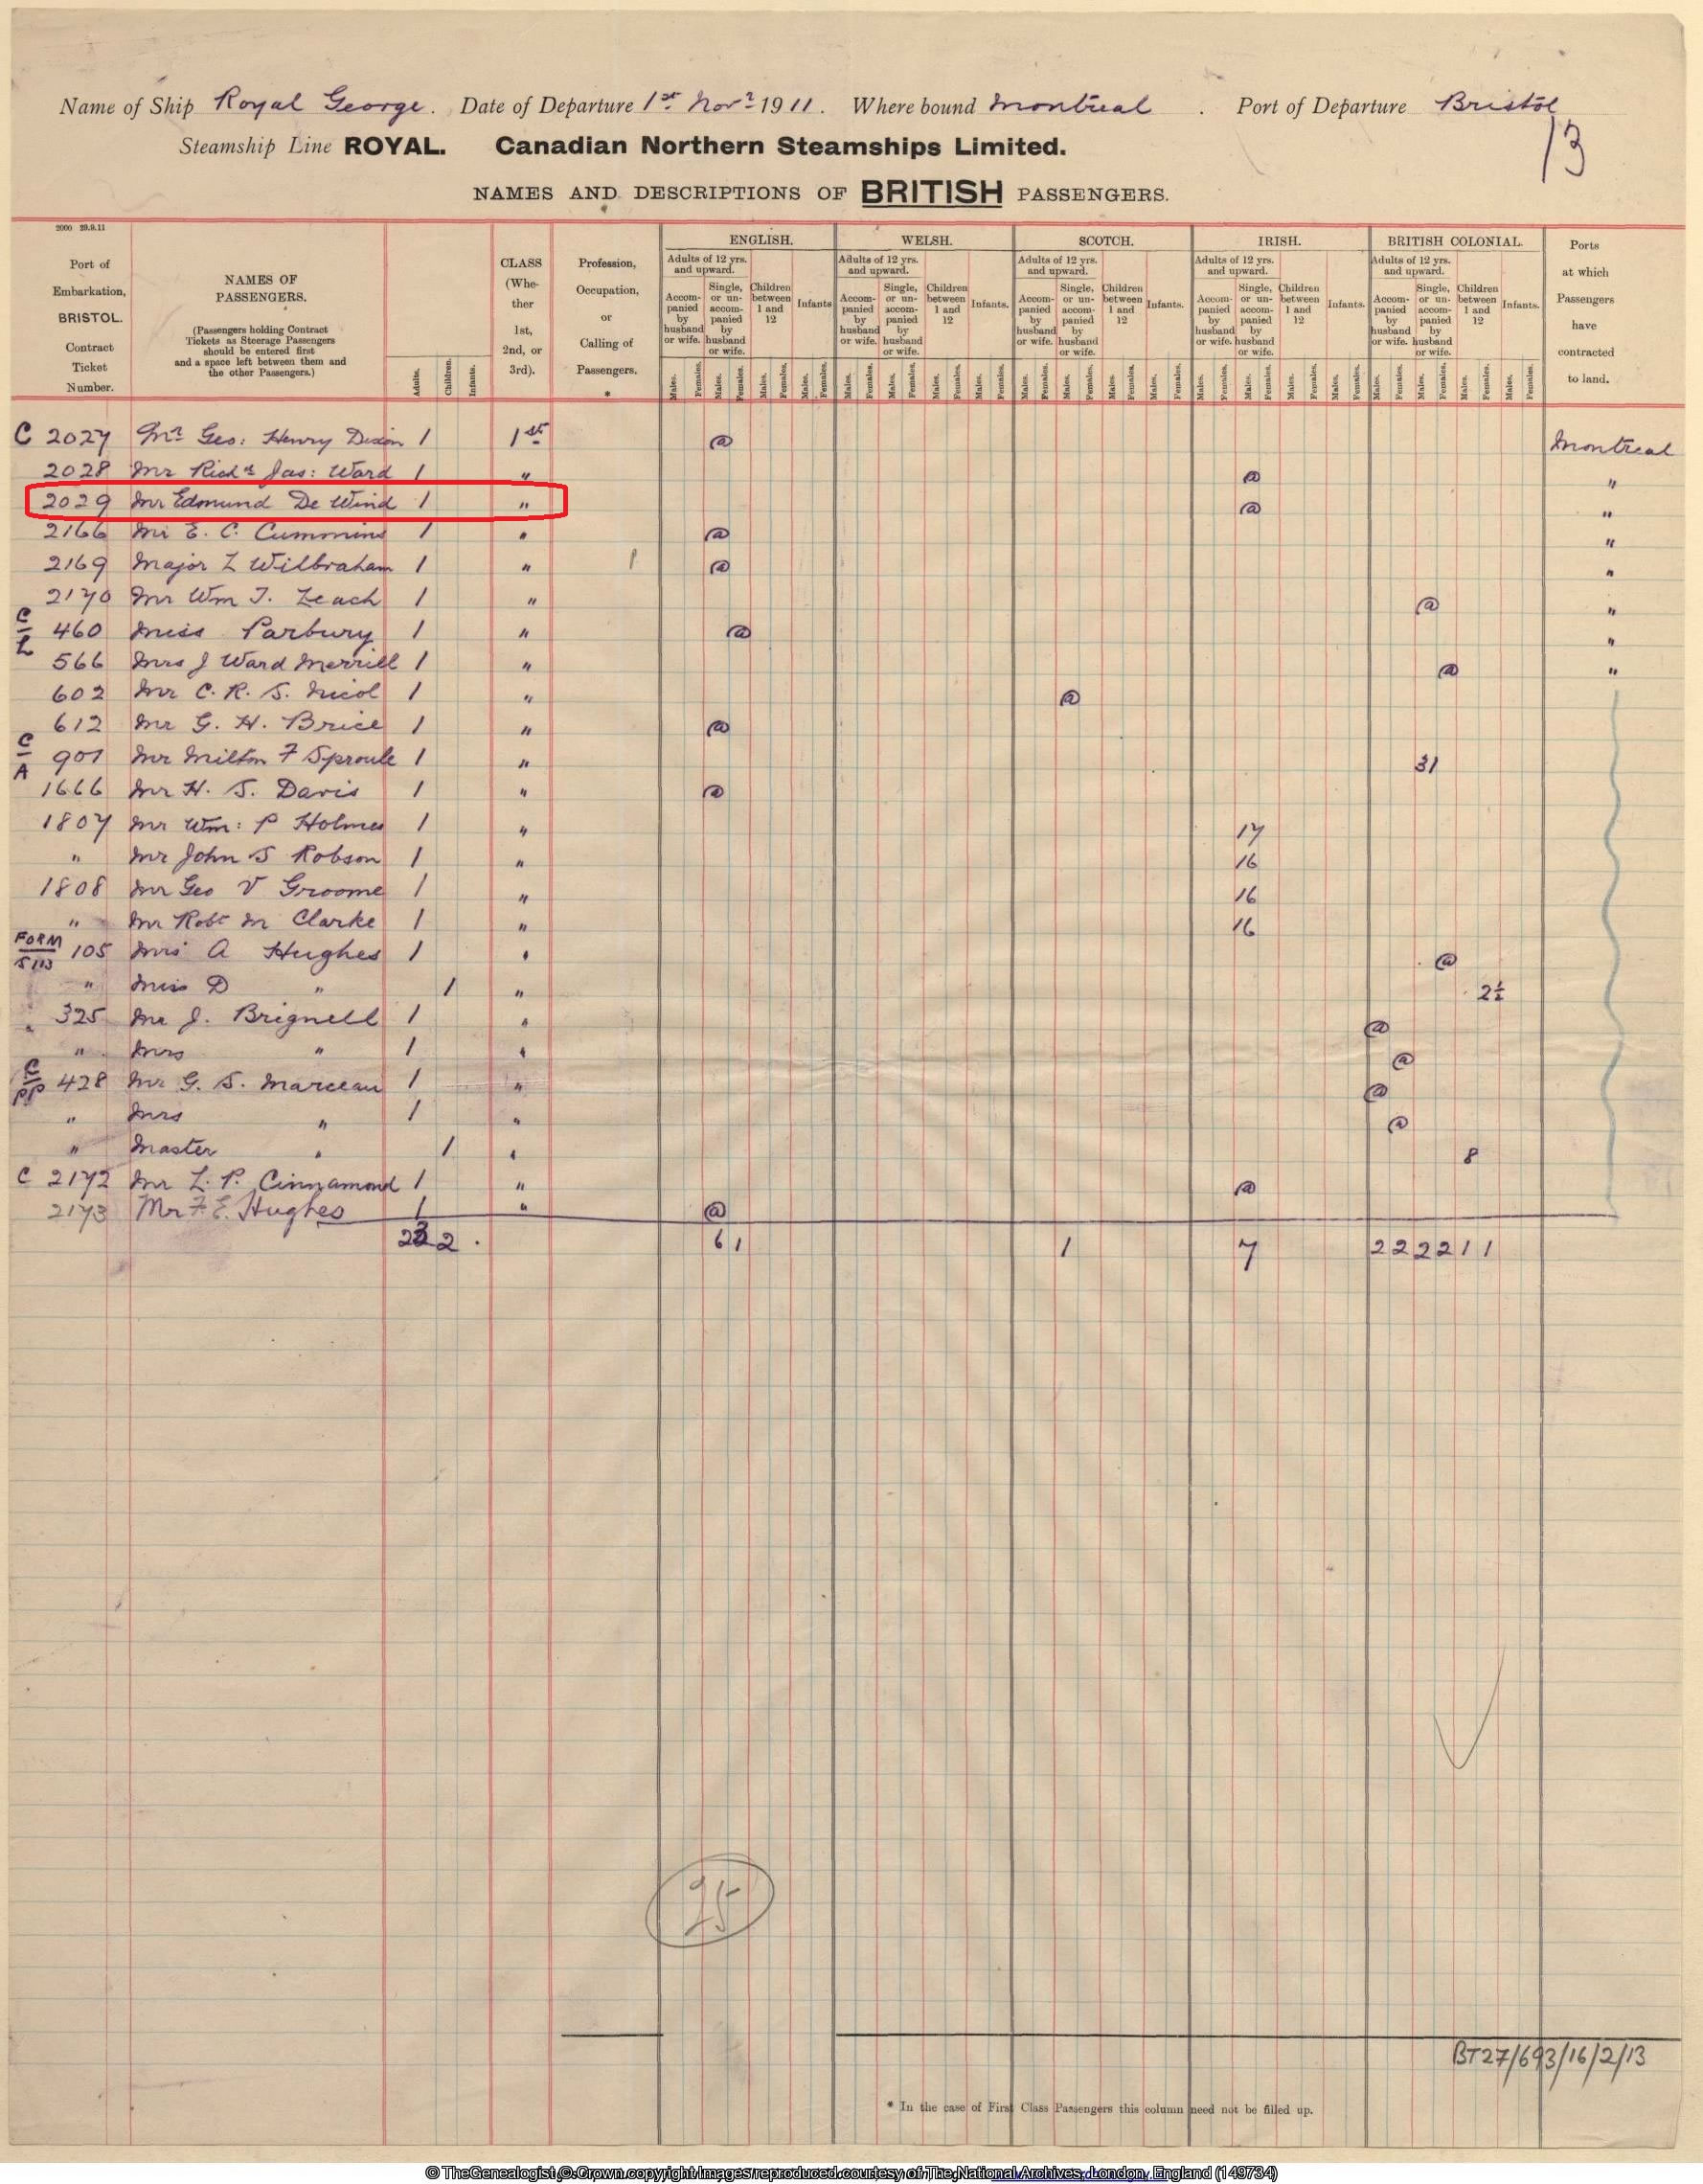 TheGenealogist's Passenger Lists reveal that De Wind sailed from Bristol to Montreal on the 1st November 1911